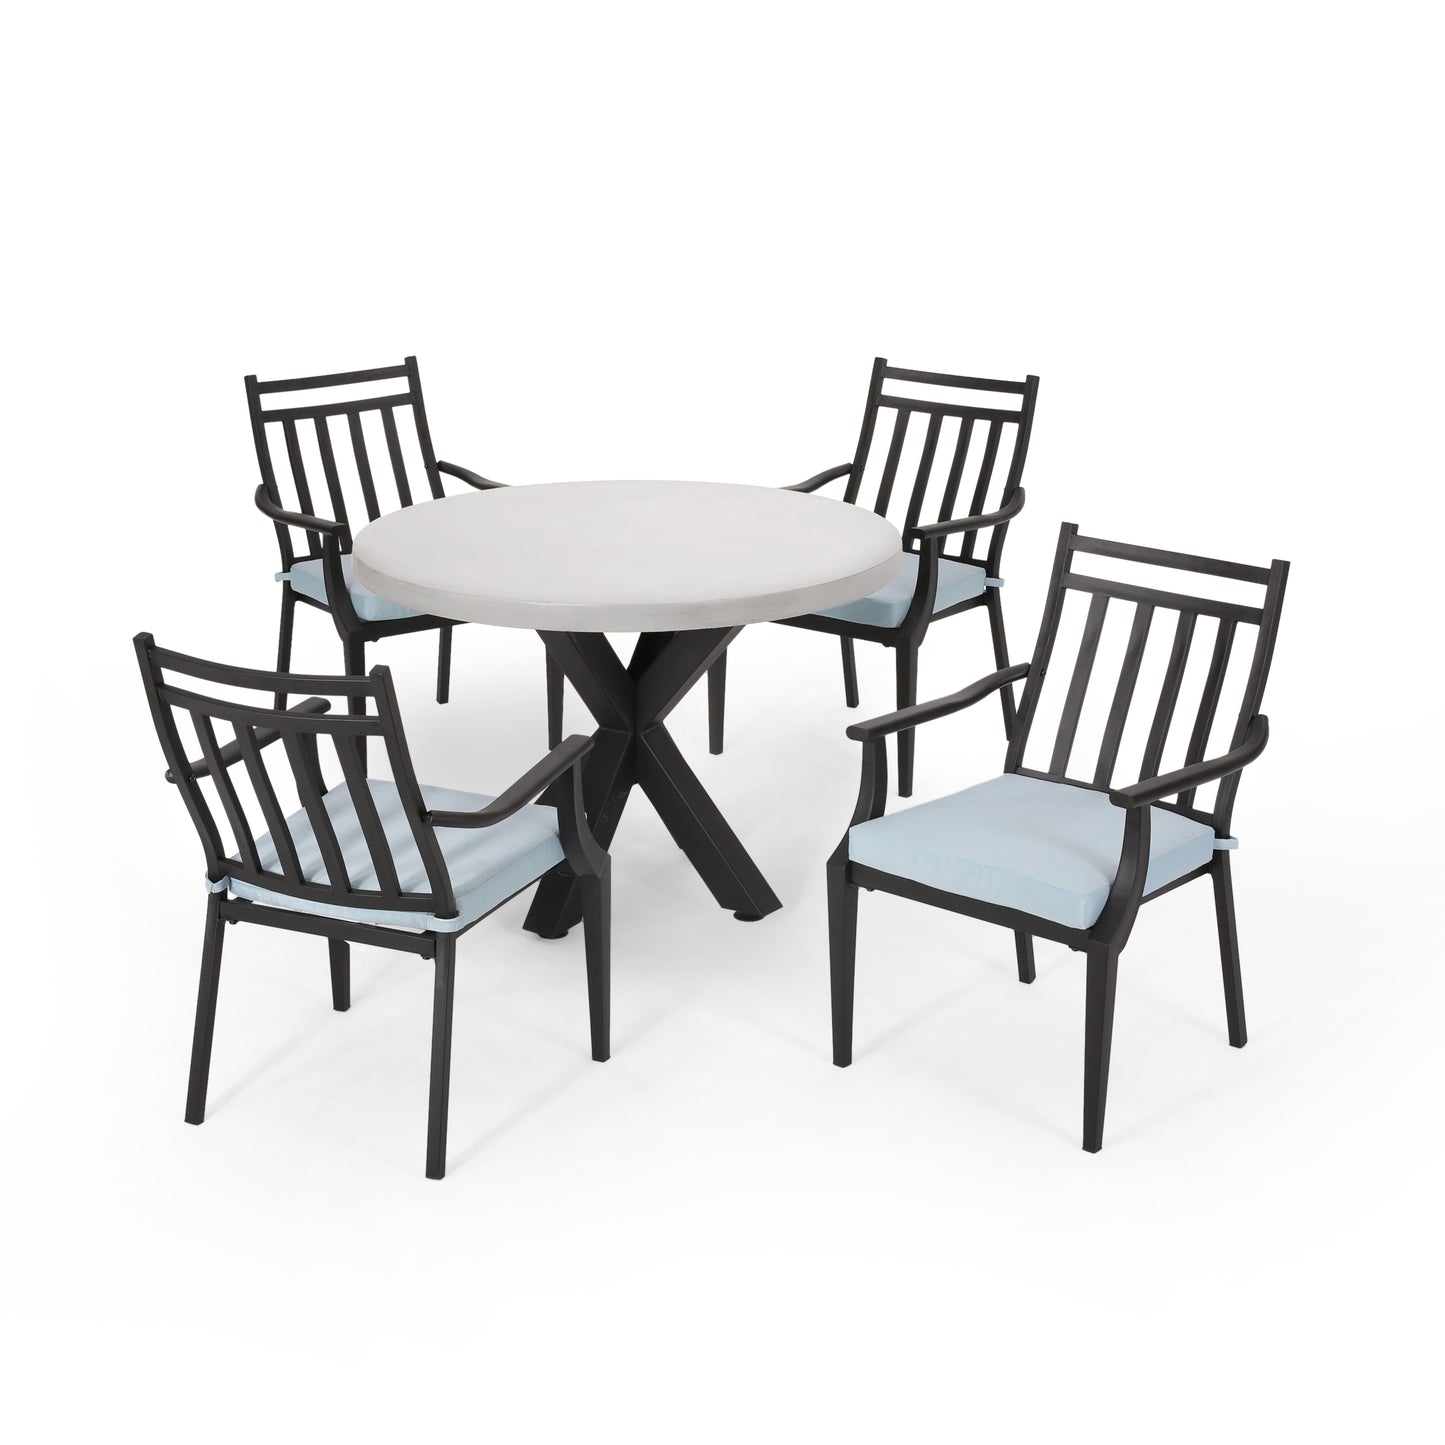 Olive Outdoor 5 Piece Dining Set with Light Weight Concrete Table